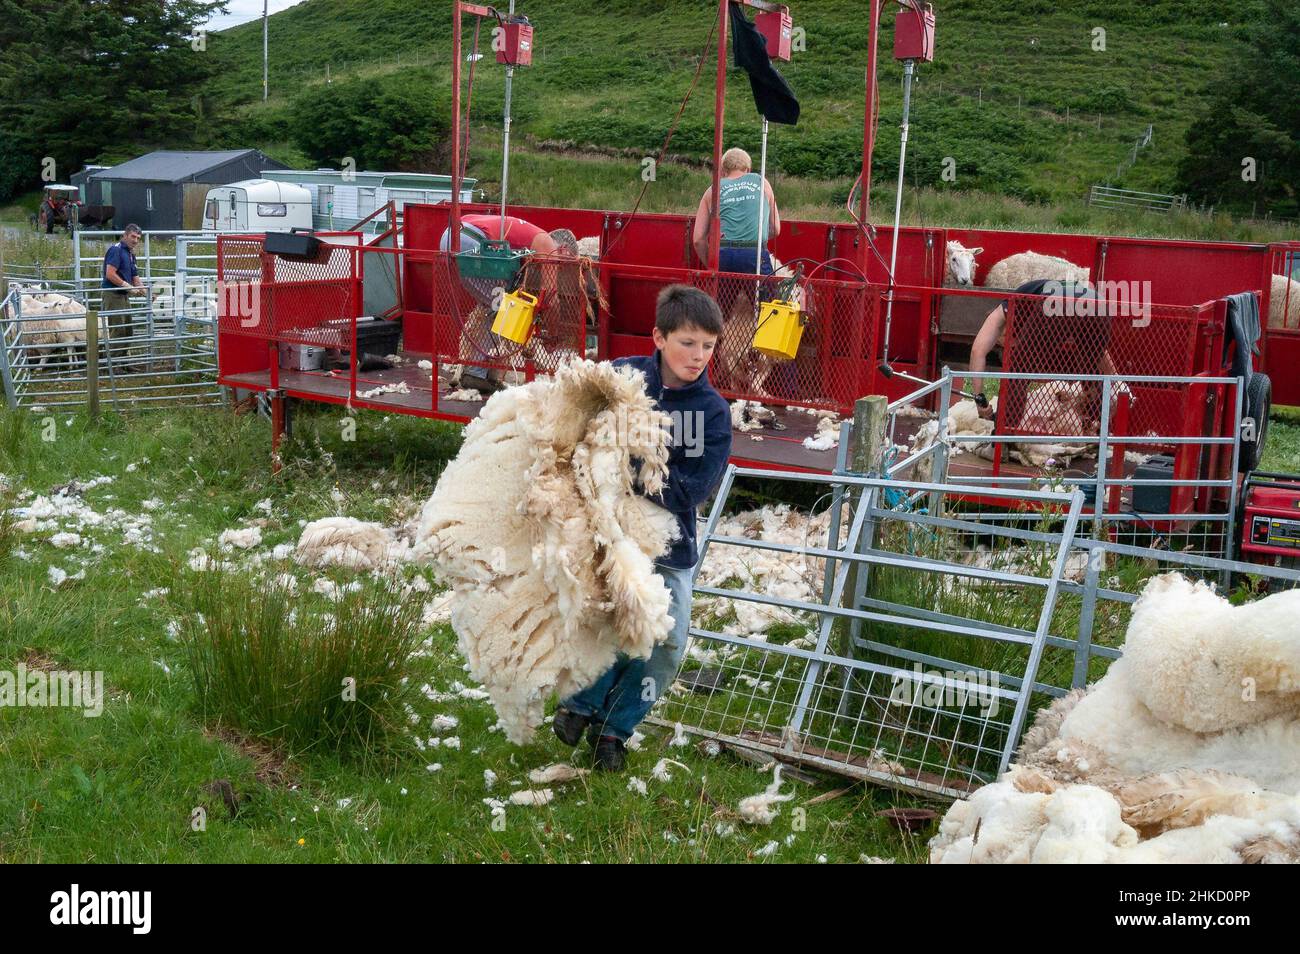 Young boy carrying woolen fleece while shearing takes place during July on the Isle of Skye in the Highlands of Scotland,Inner Hebridies,Scotland, UK Stock Photo